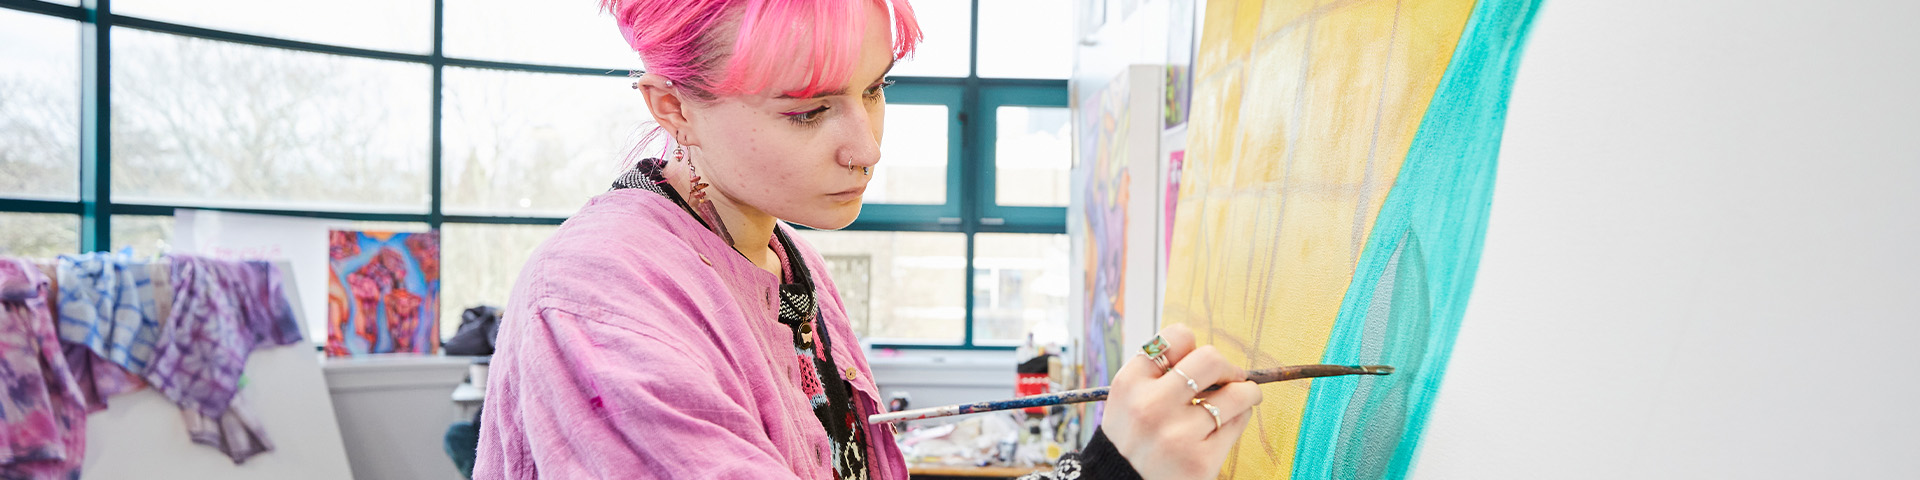 A fine art student painting on a canvas.